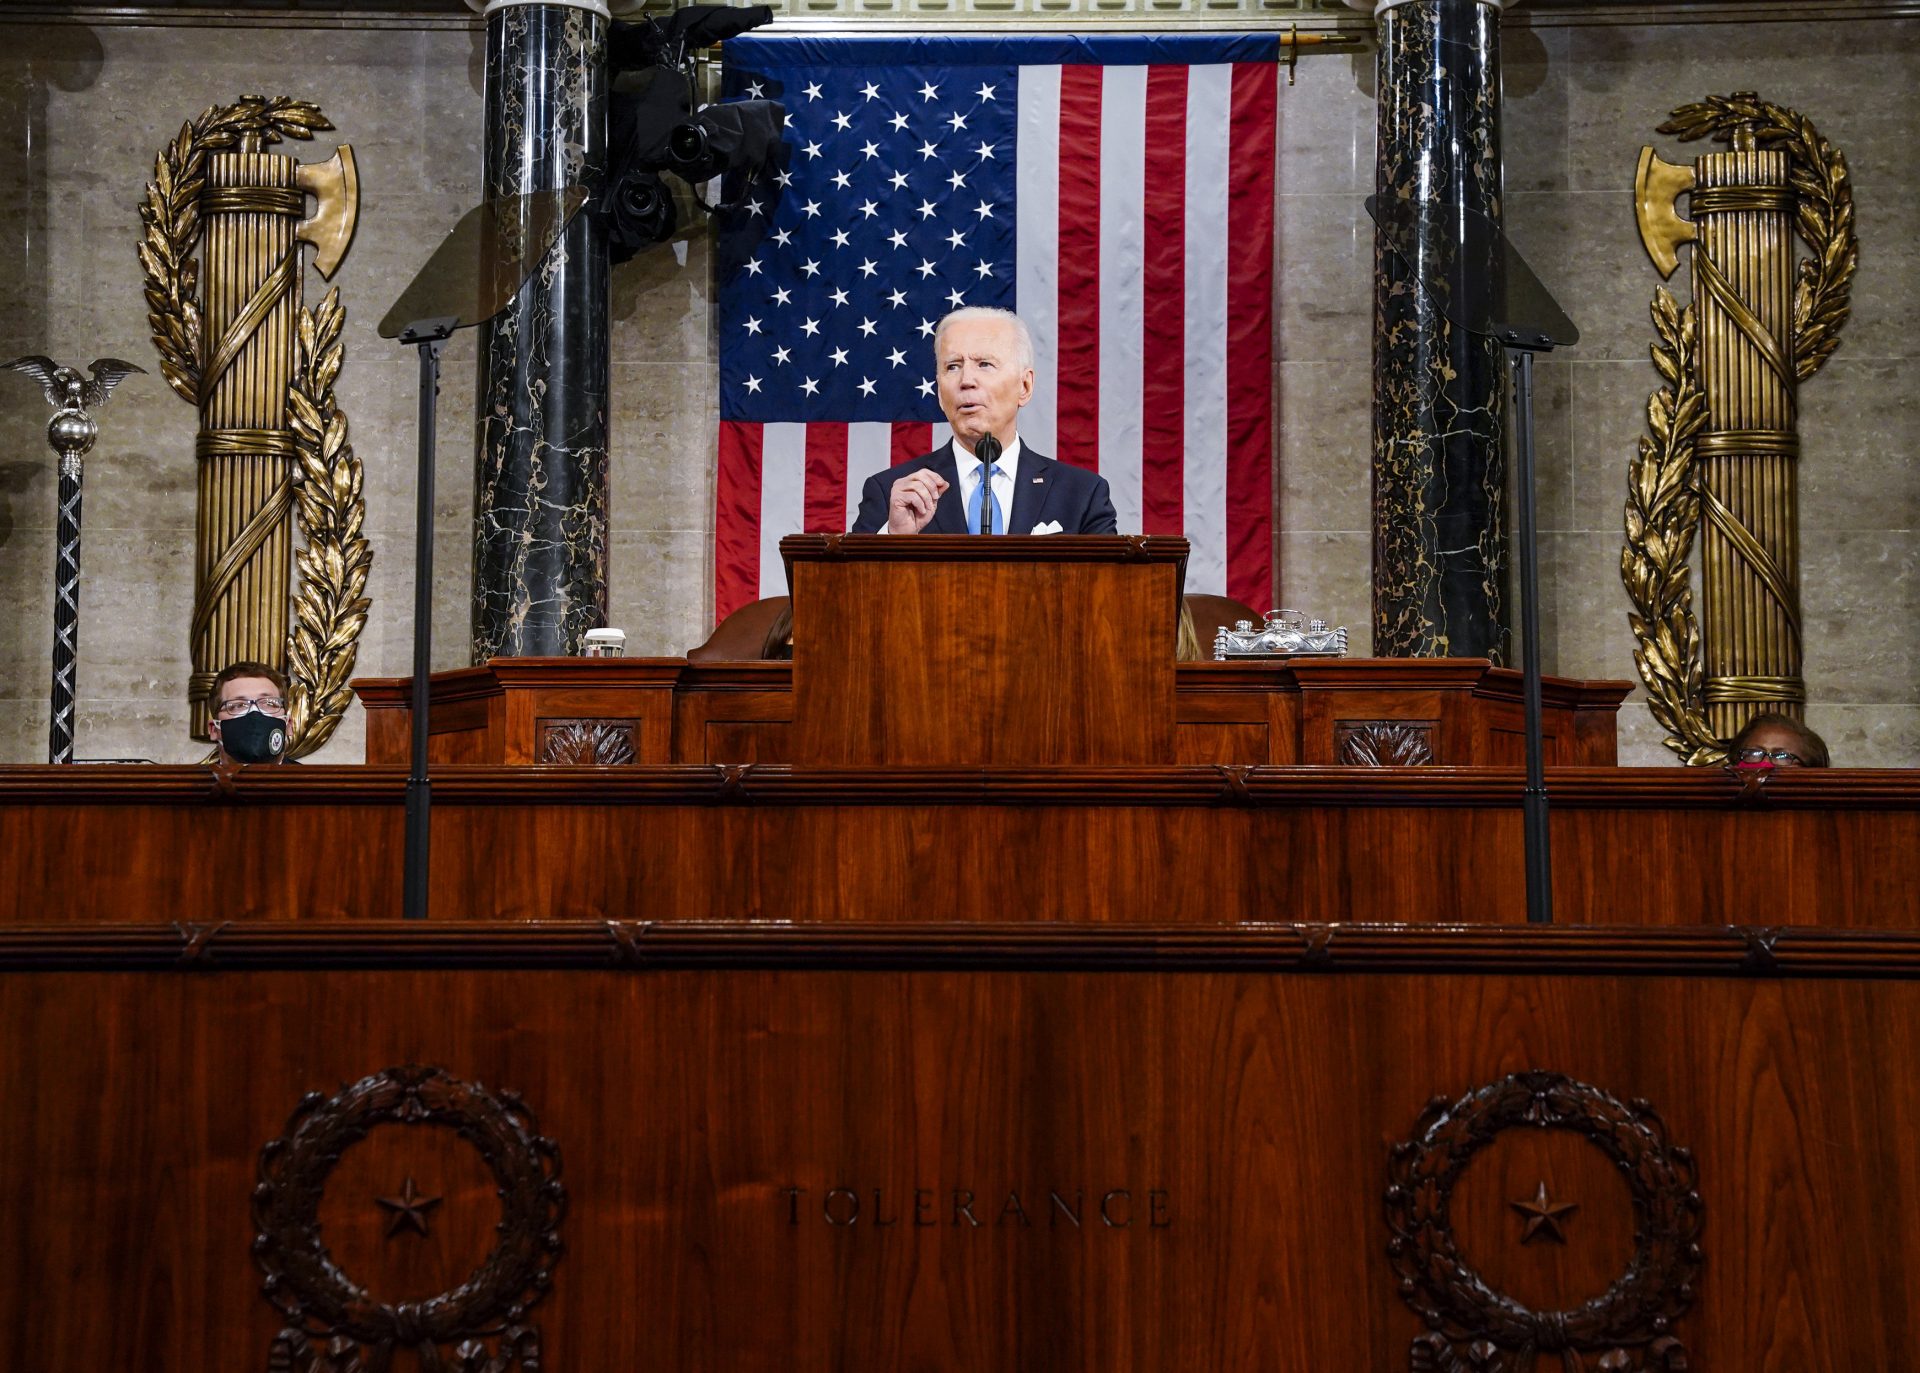 President Joe Biden addresses a joint session of Congress, Wednesday, April 28, 2021, in the House Chamber at the U.S. Capitol in Washington.